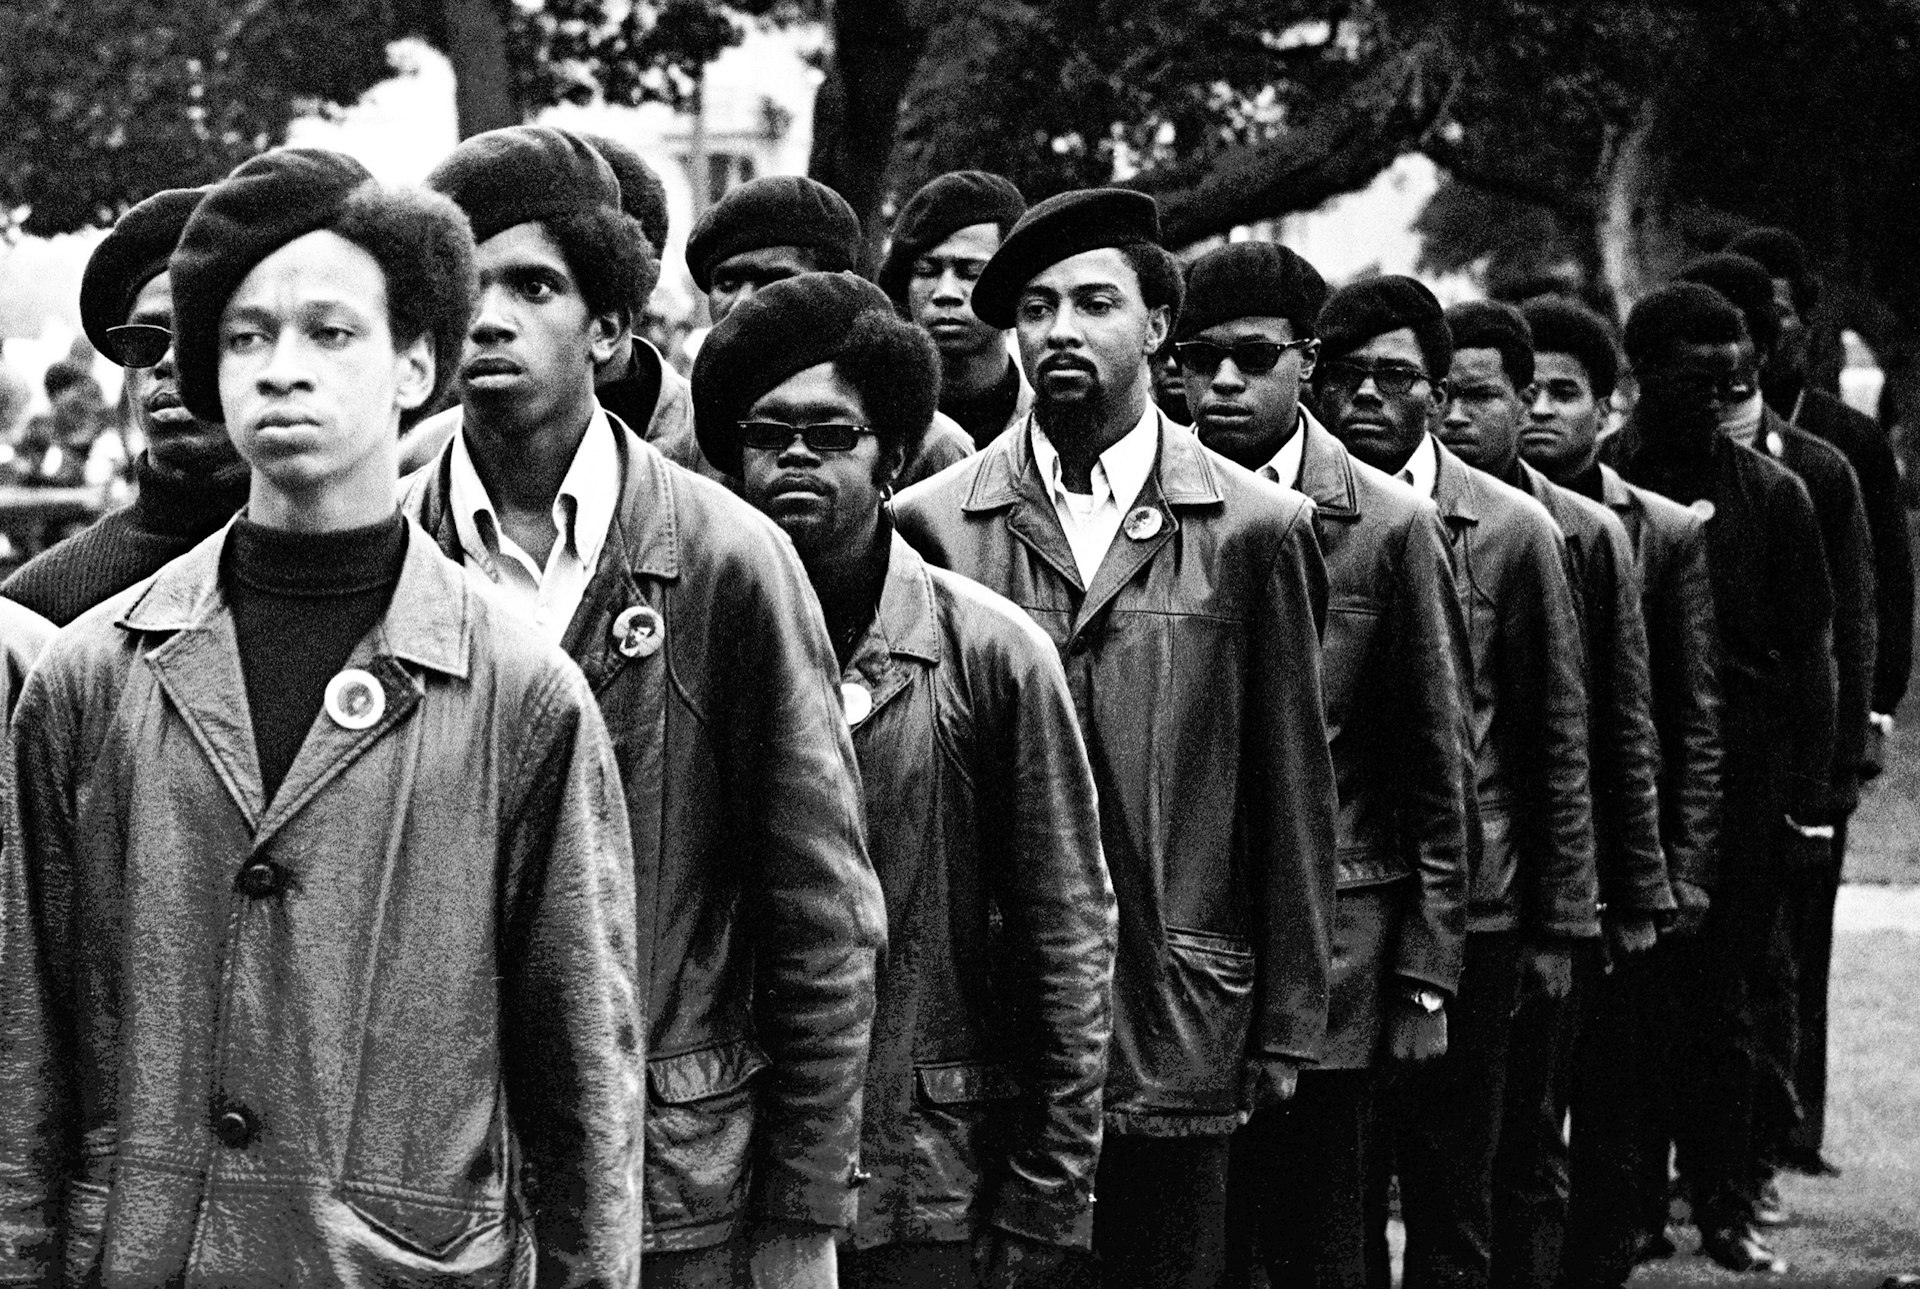 The white photographer who documented the rise and fall of the Black Panthers